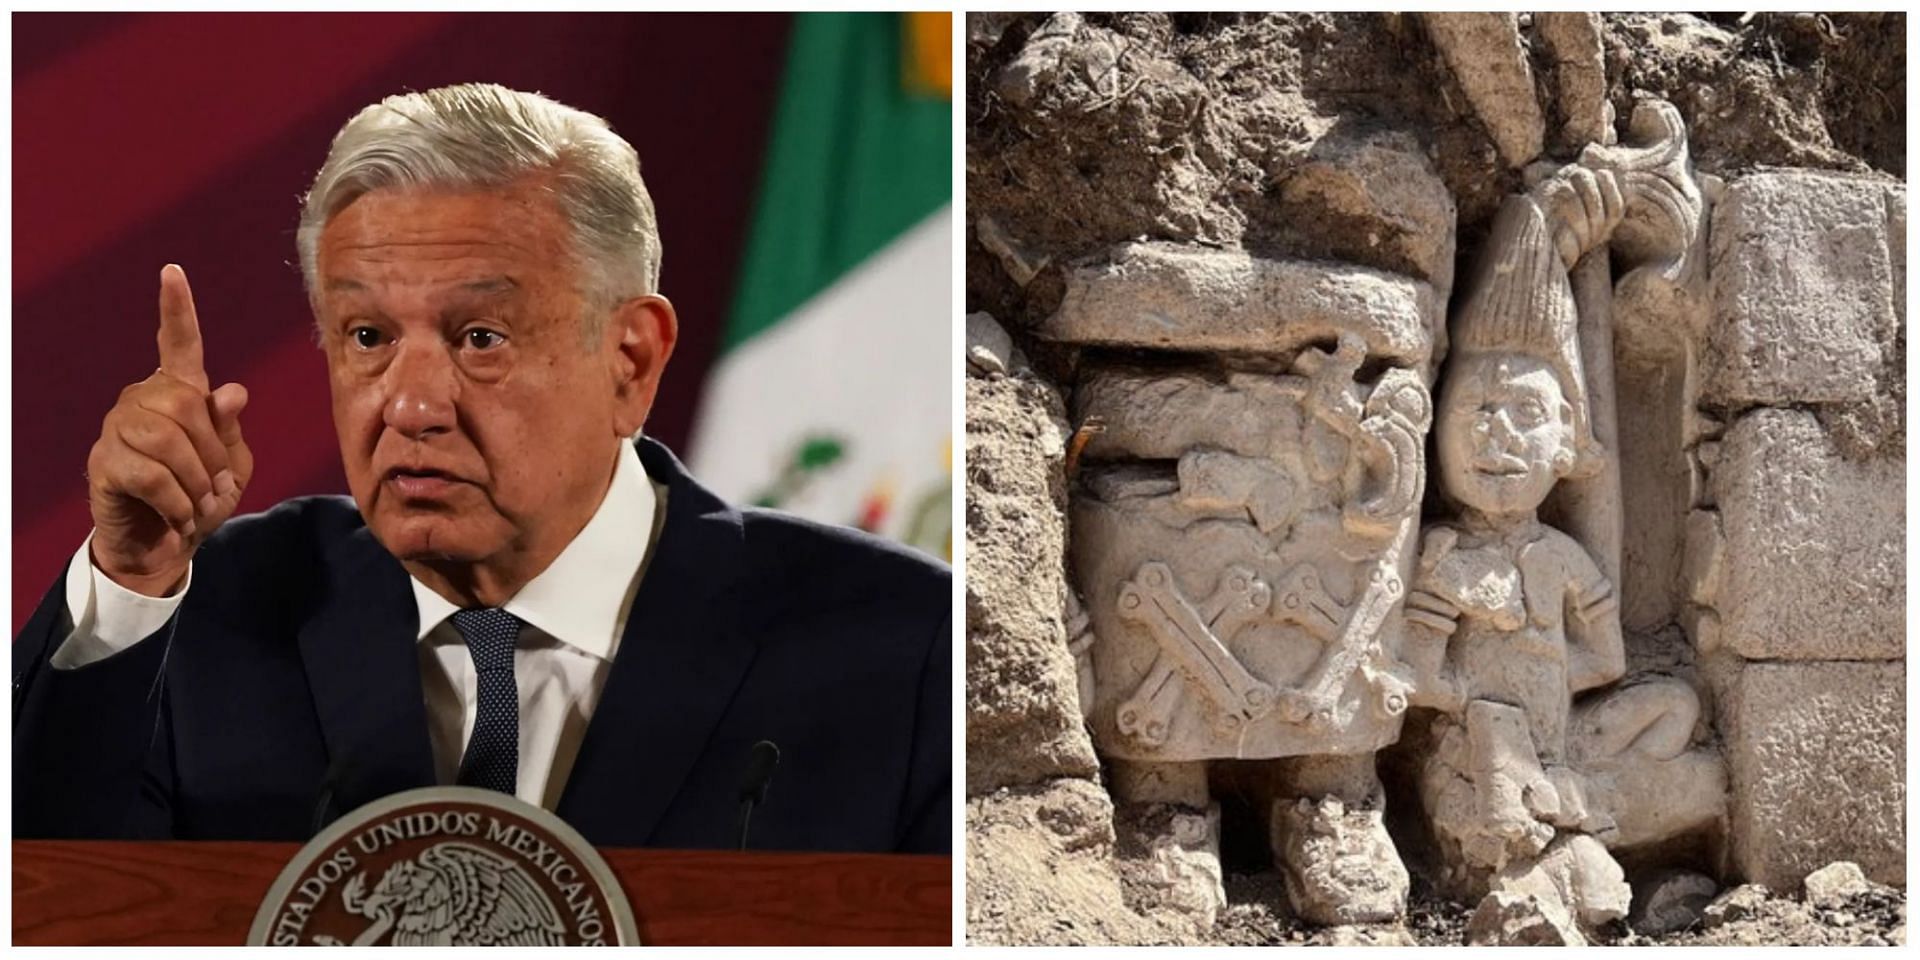 Social media users reacted to Mexican president claims about the elf: More details revealed. (Image via Getty Images &amp; Twitter)